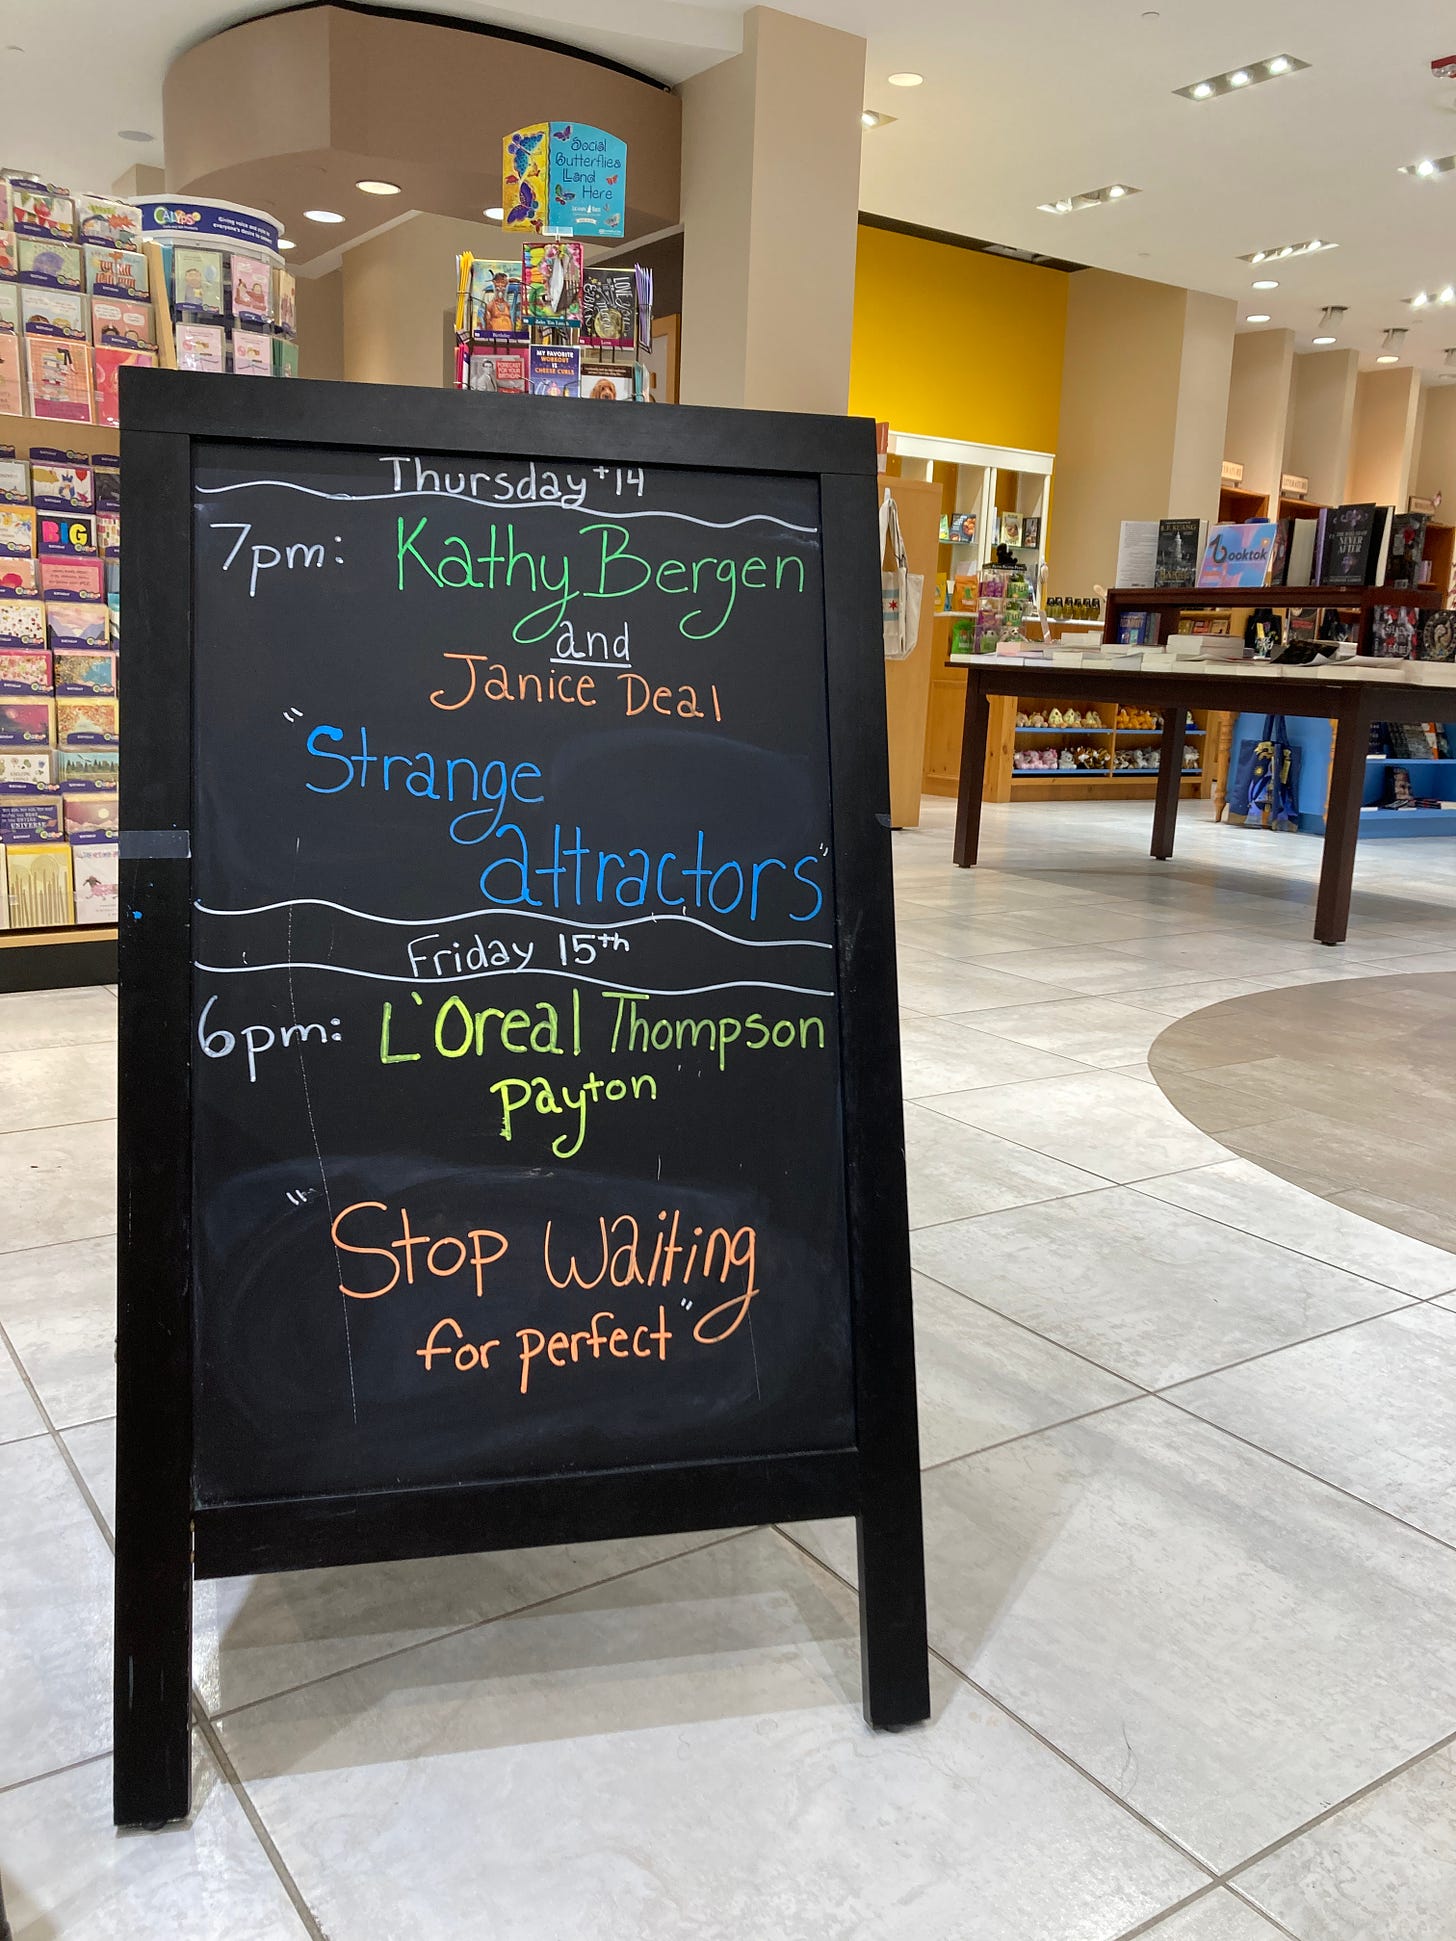 Picture of a sign promoting author events at a bookstore